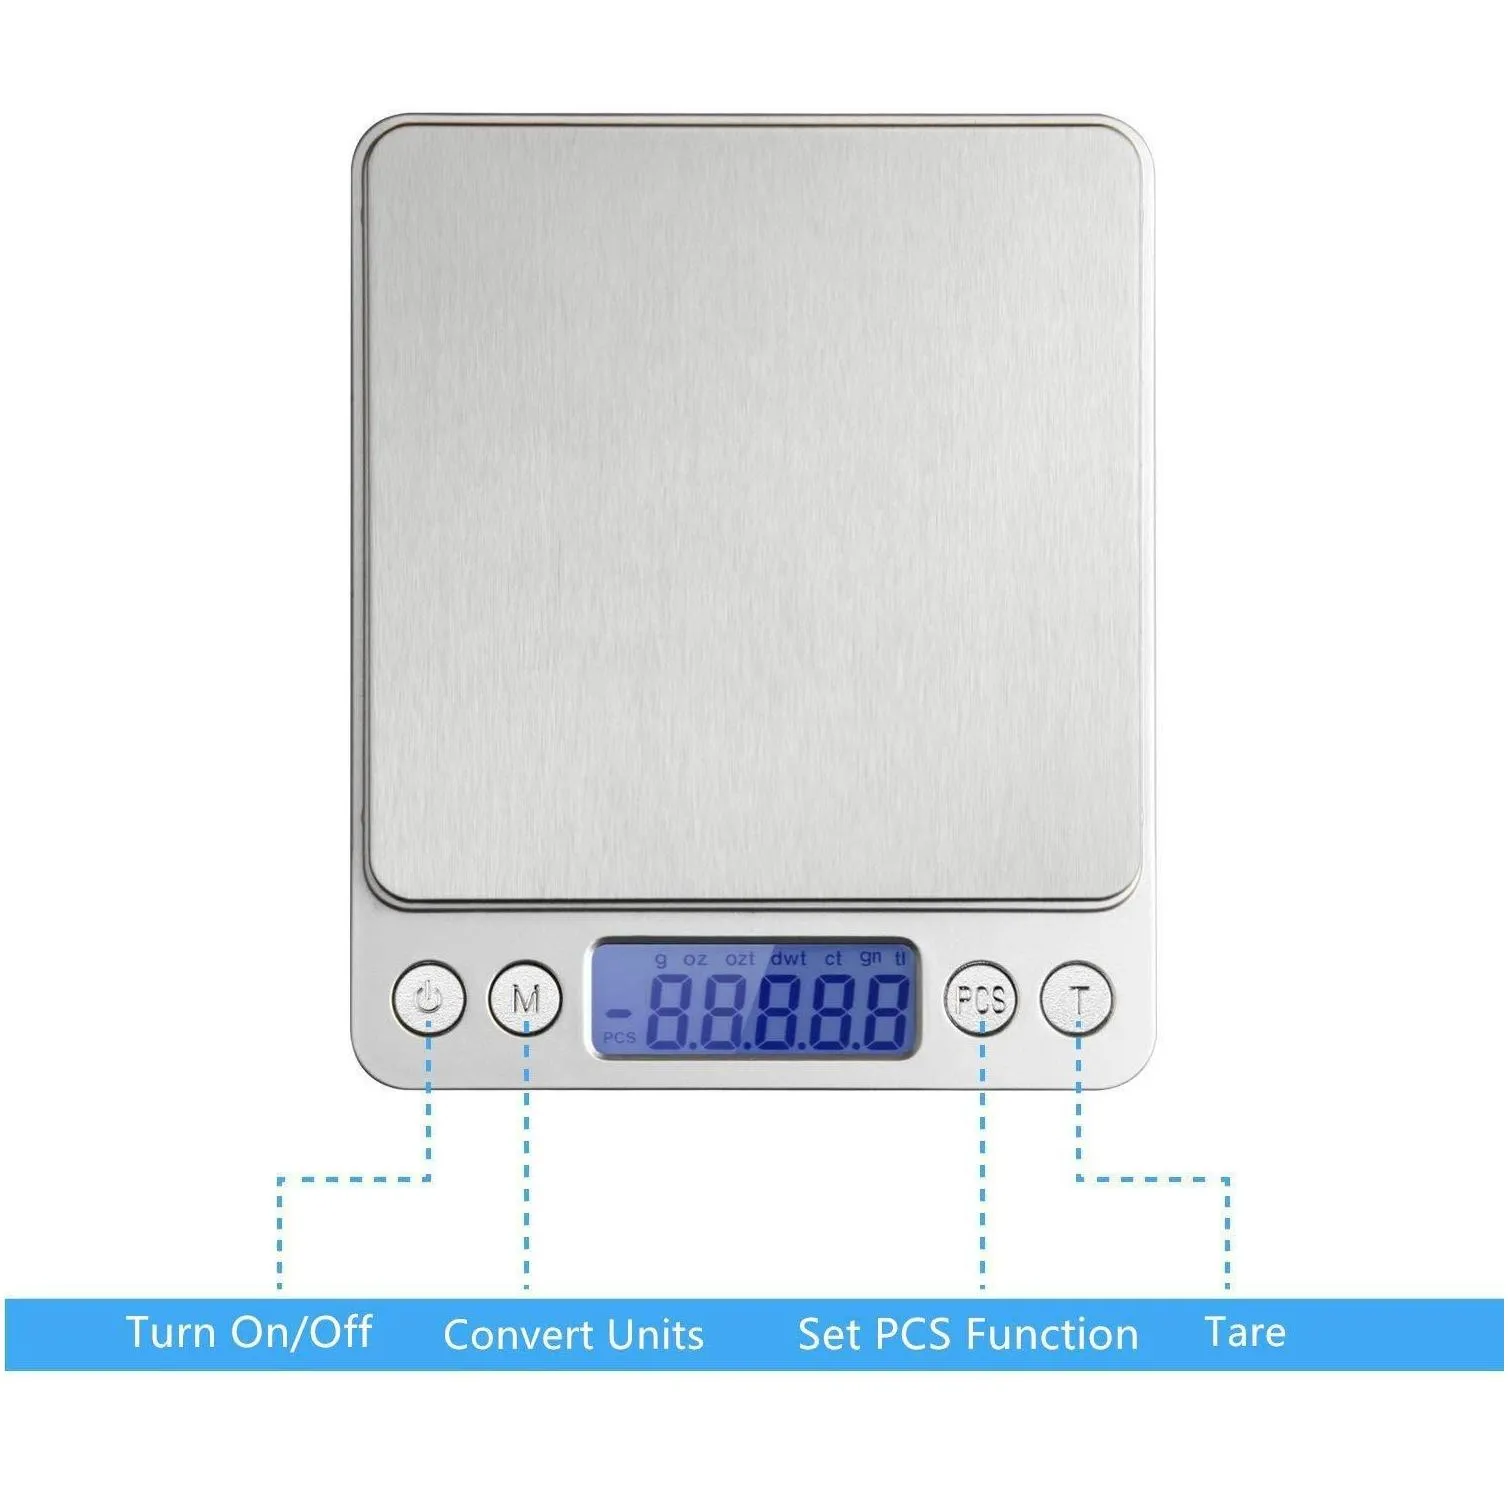 Weighing Scales Wholesale 1000G/0.1G Lcd Portable Mini Electronic Digital Scales Pocket Case Postal Kitchen Jewelry Weight Nce Drop De Dh6Er